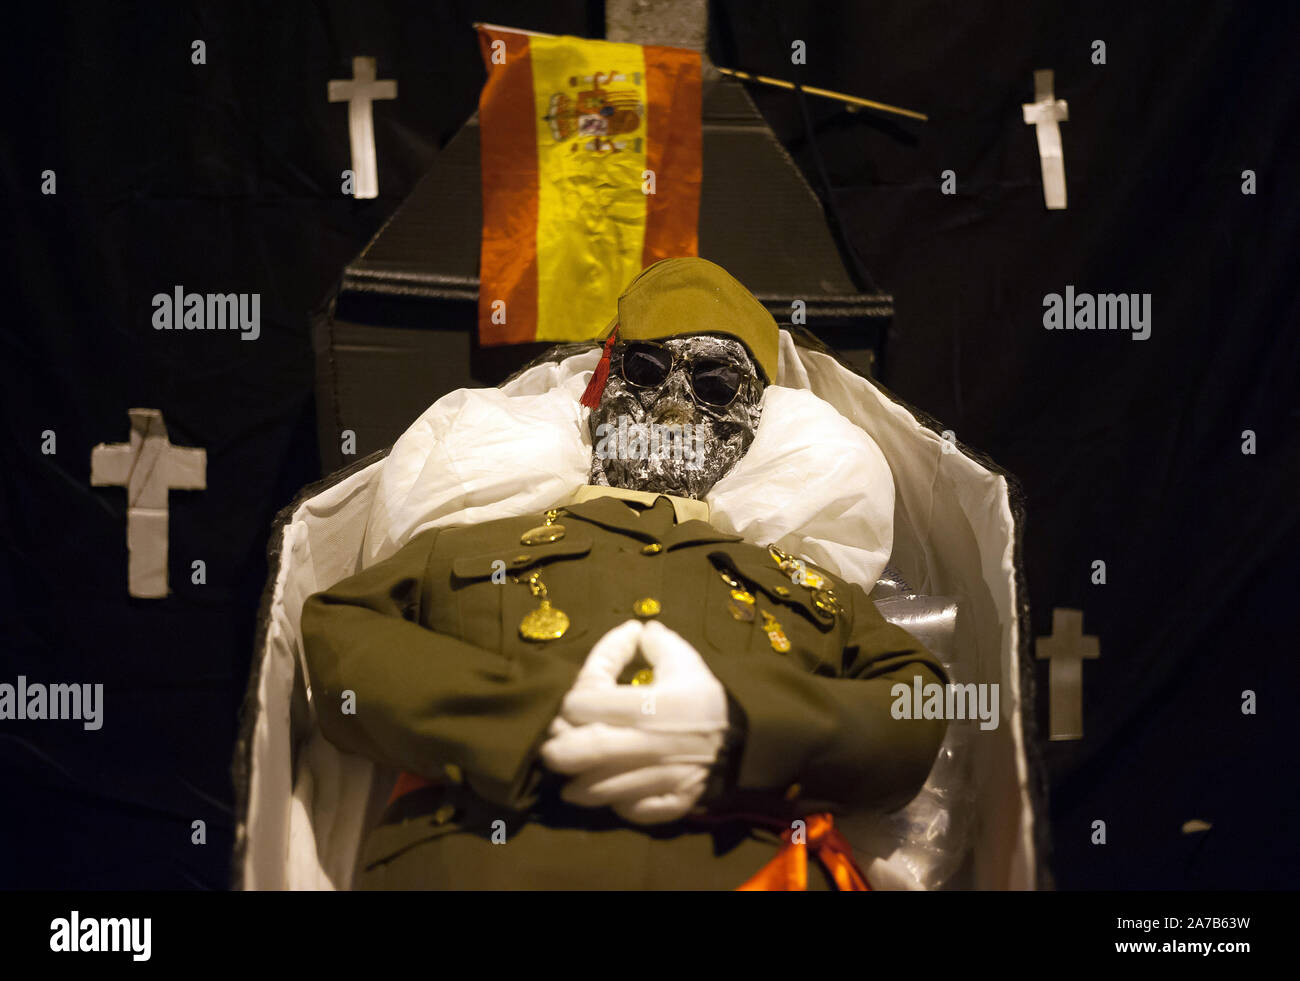 Malaga, Spain. 31st Oct, 2019. A doll depicting the Spanish dictator Francisco Franco is seen with a spanish flag in a coffin during the VI edition of ''Churriana Noche del Terror'' (Churriana Horror Night) to celebrate the Halloween night in the neighbourhood of Churriana.Residents of Churriana participate in the Halloween day dressed with horrific costumes, decorating their houses and with scary performances along the streets. The 'Churriana Horror Night' is one the most popular event in the city to marks the Halloween Day, and for this occasion the theme of the edition is the witches. (C Stock Photo